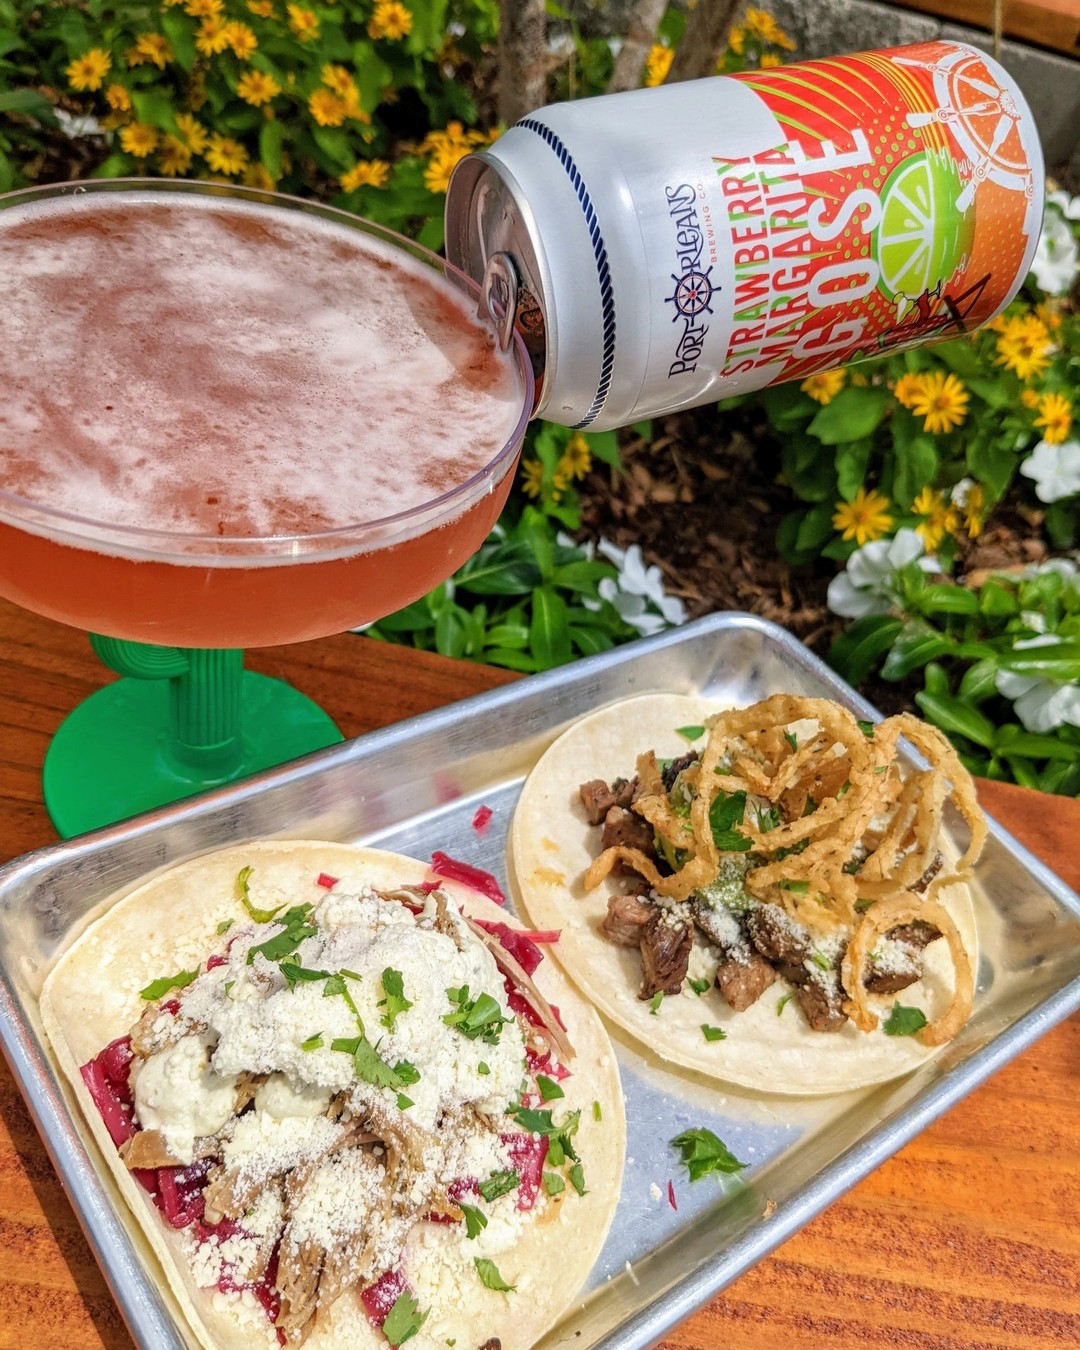 This is what a perfect combo looks like! 😍🌮
Delicious tacos made with fresh ingredients and signature styles. Wash it down with an ice cold drink from our friends at @portorleansbrewingco for a perfect meal! 🍹

 #bowls #lifoodfinds #longislandrestaurants #specials #lieats #longisland #nolaeats #nolafoodie #cocktails #tacos #tacosarelife